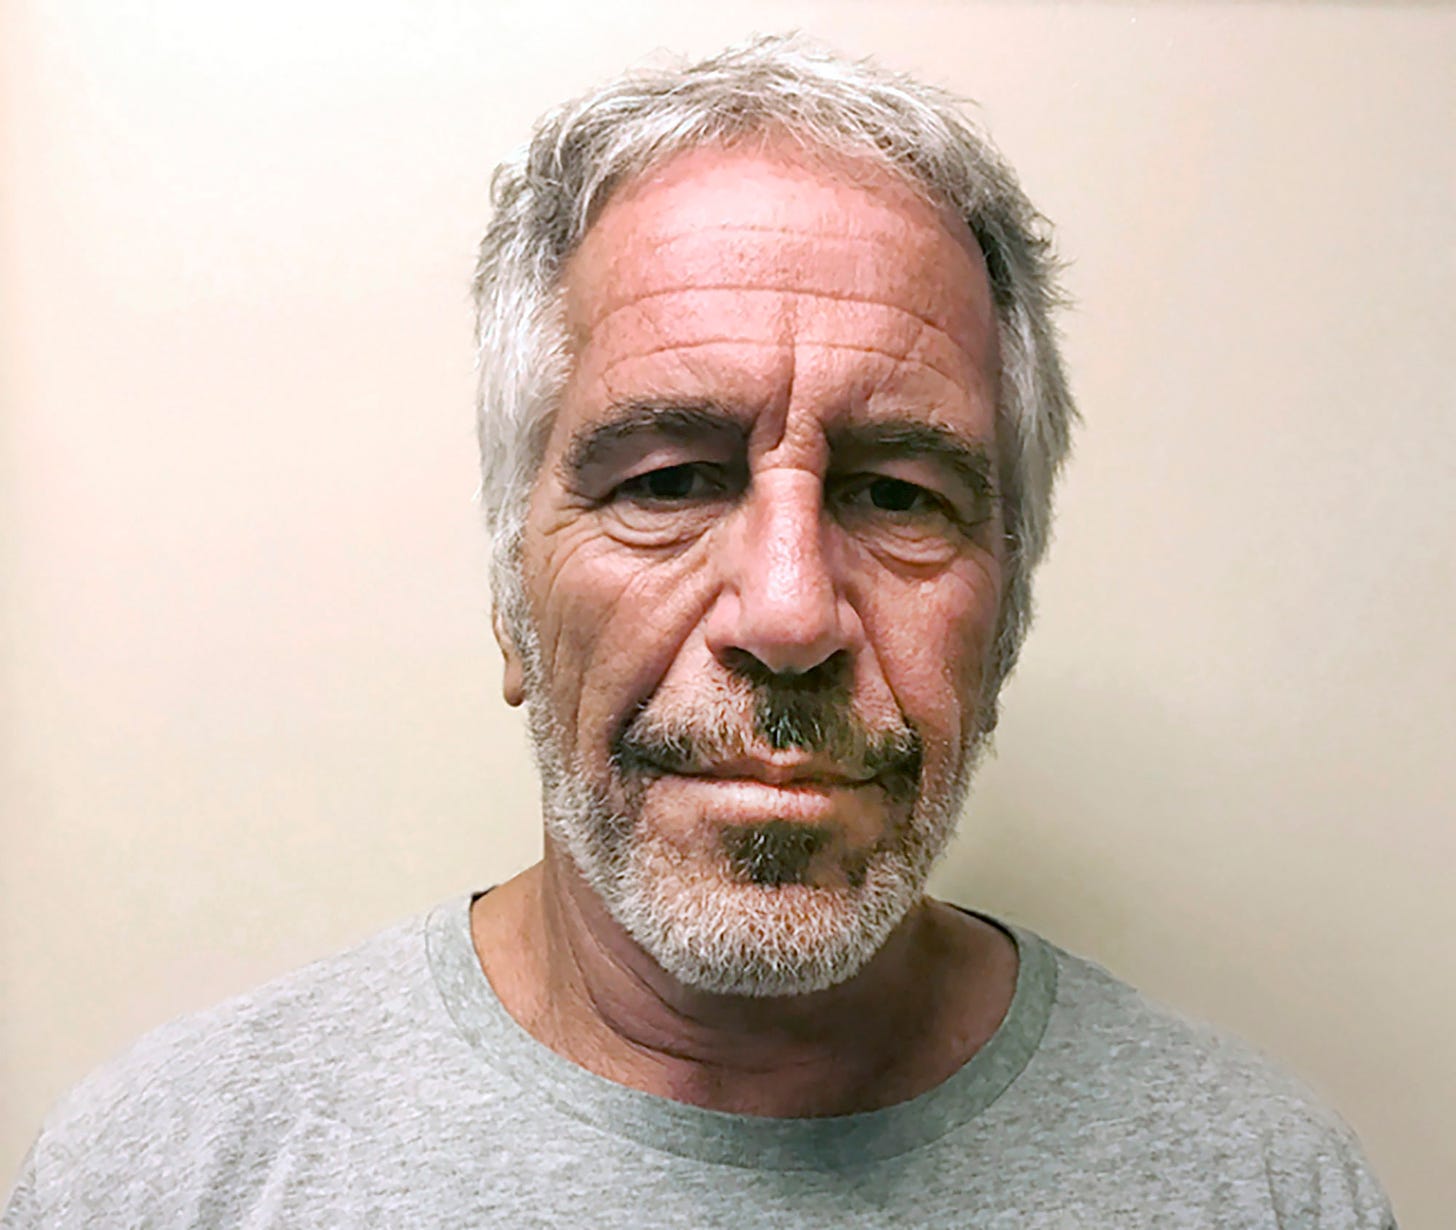 Jeffrey Epstein killed himself while awaiting trial in 2019